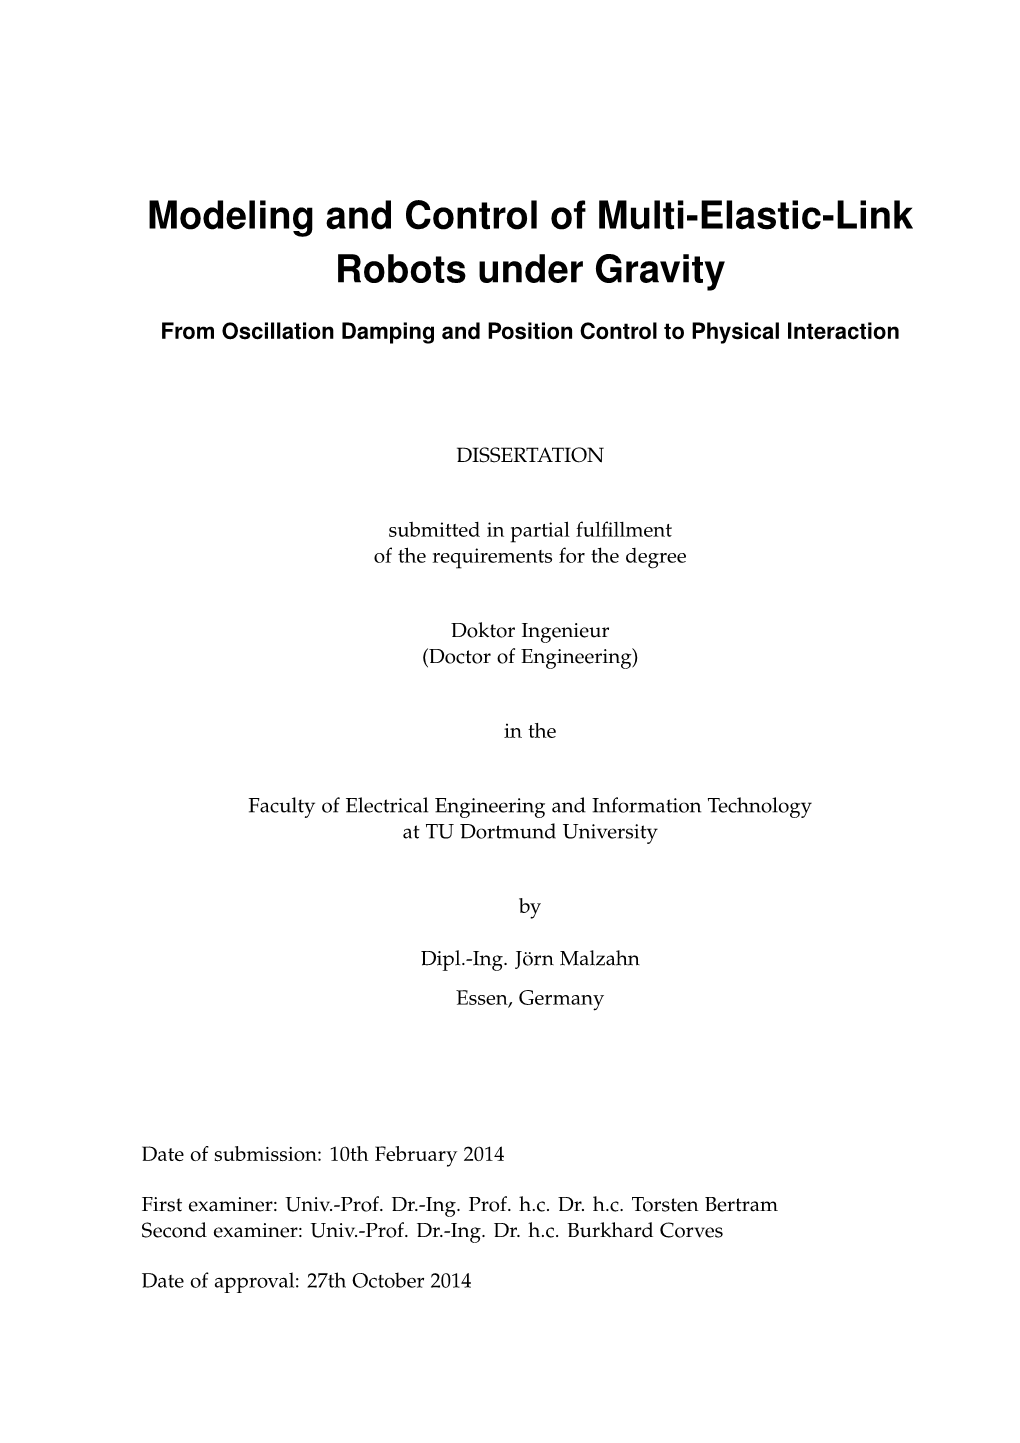 Modeling and Control of Multi-Elastic-Link Robots Under Gravity